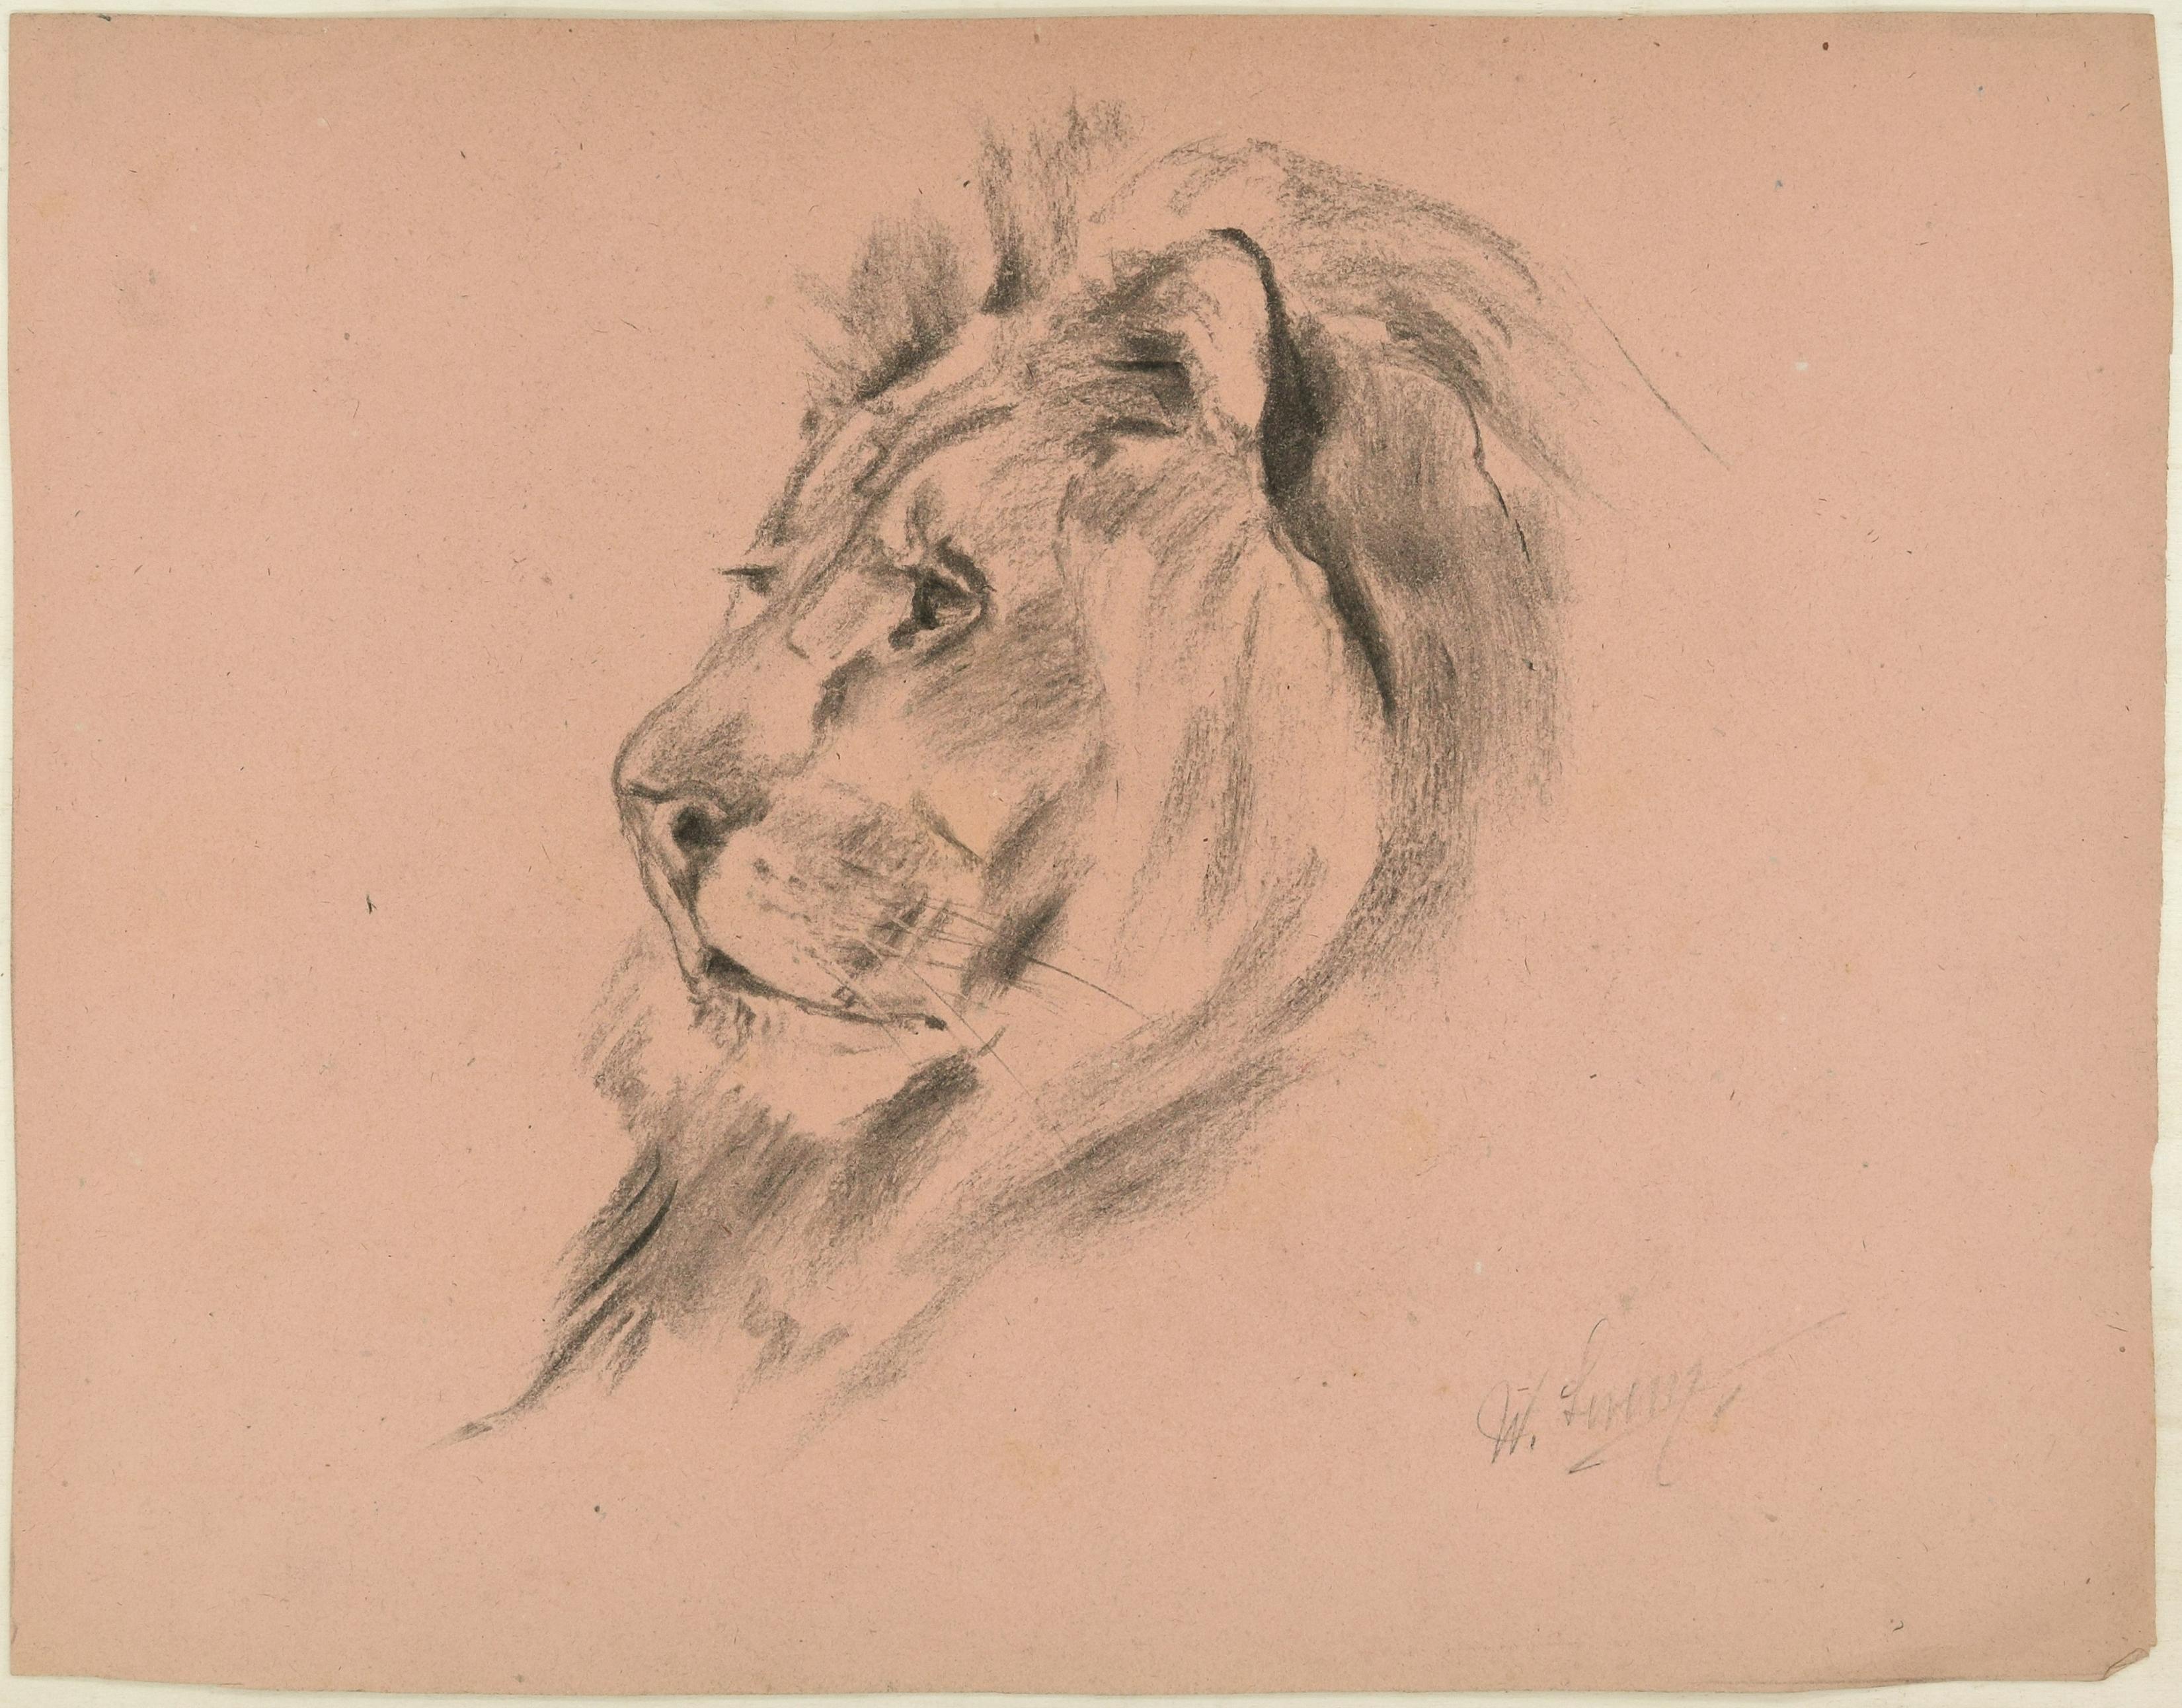 Wilhelm Lorenz Animal Art - Profile of a Lion - Original Charcoal Drawing by Willy Lorenz - 1940s